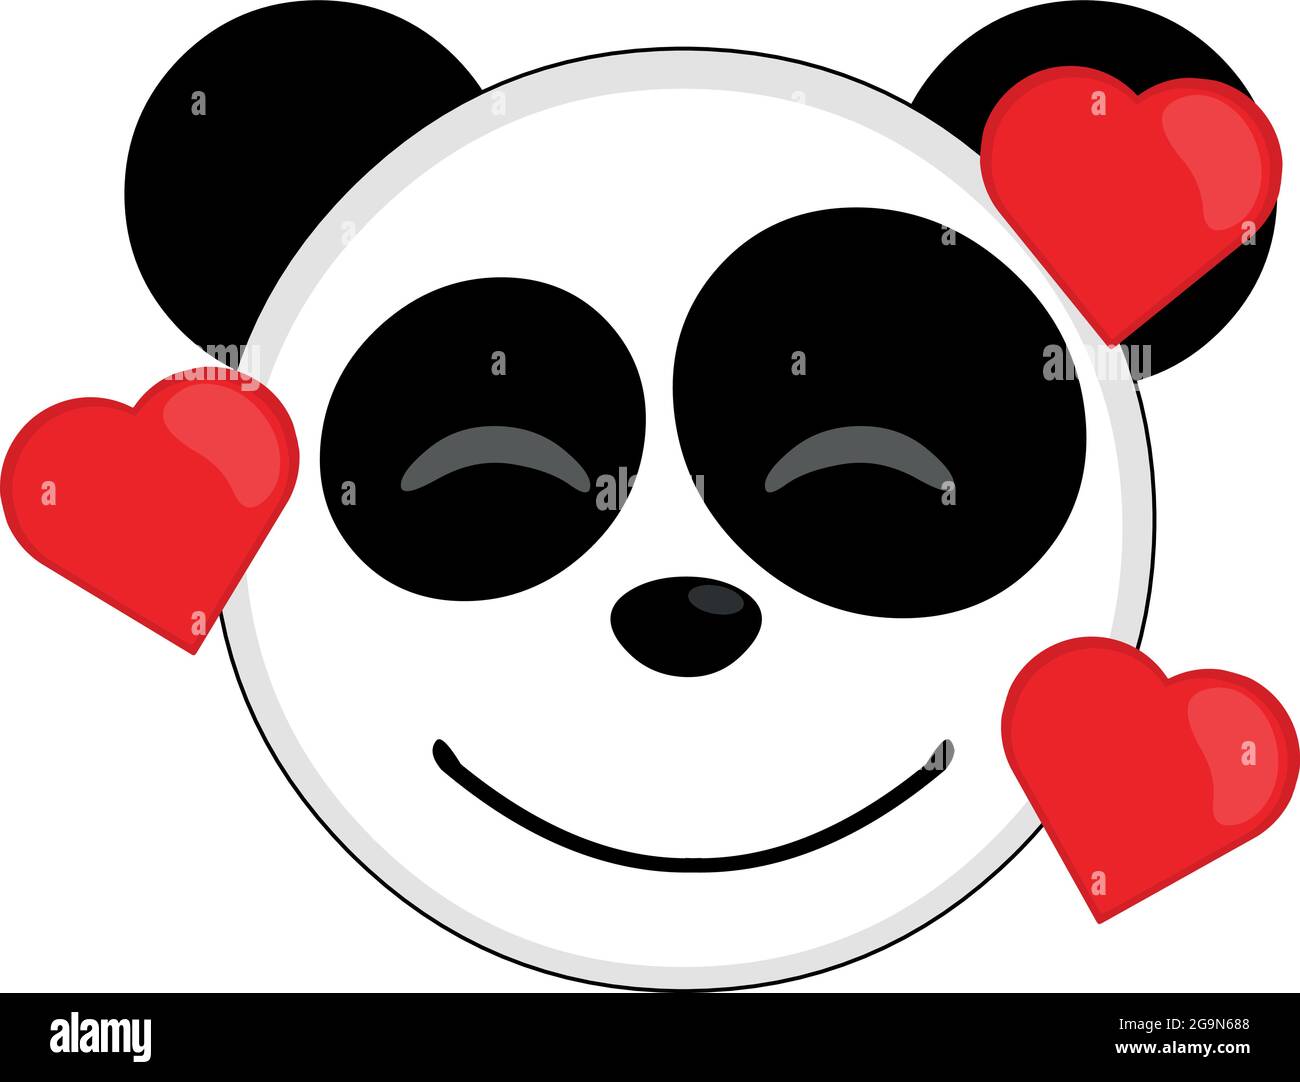 Vector emoticon illustration of the face of a cartoon panda bear surrounded by hearts Stock Vector